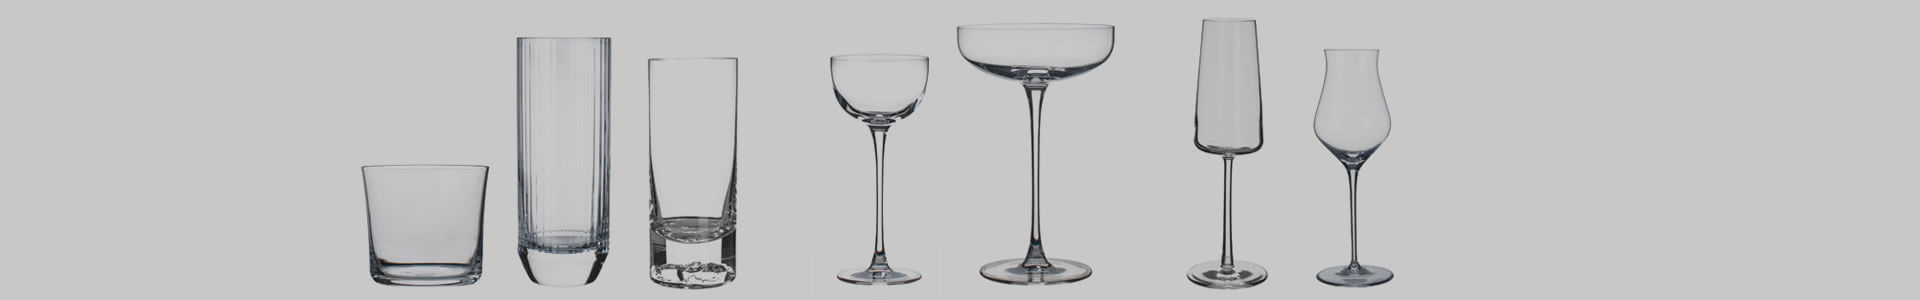 Various glasses from the manufacturer Nude Glass stand next to each other.